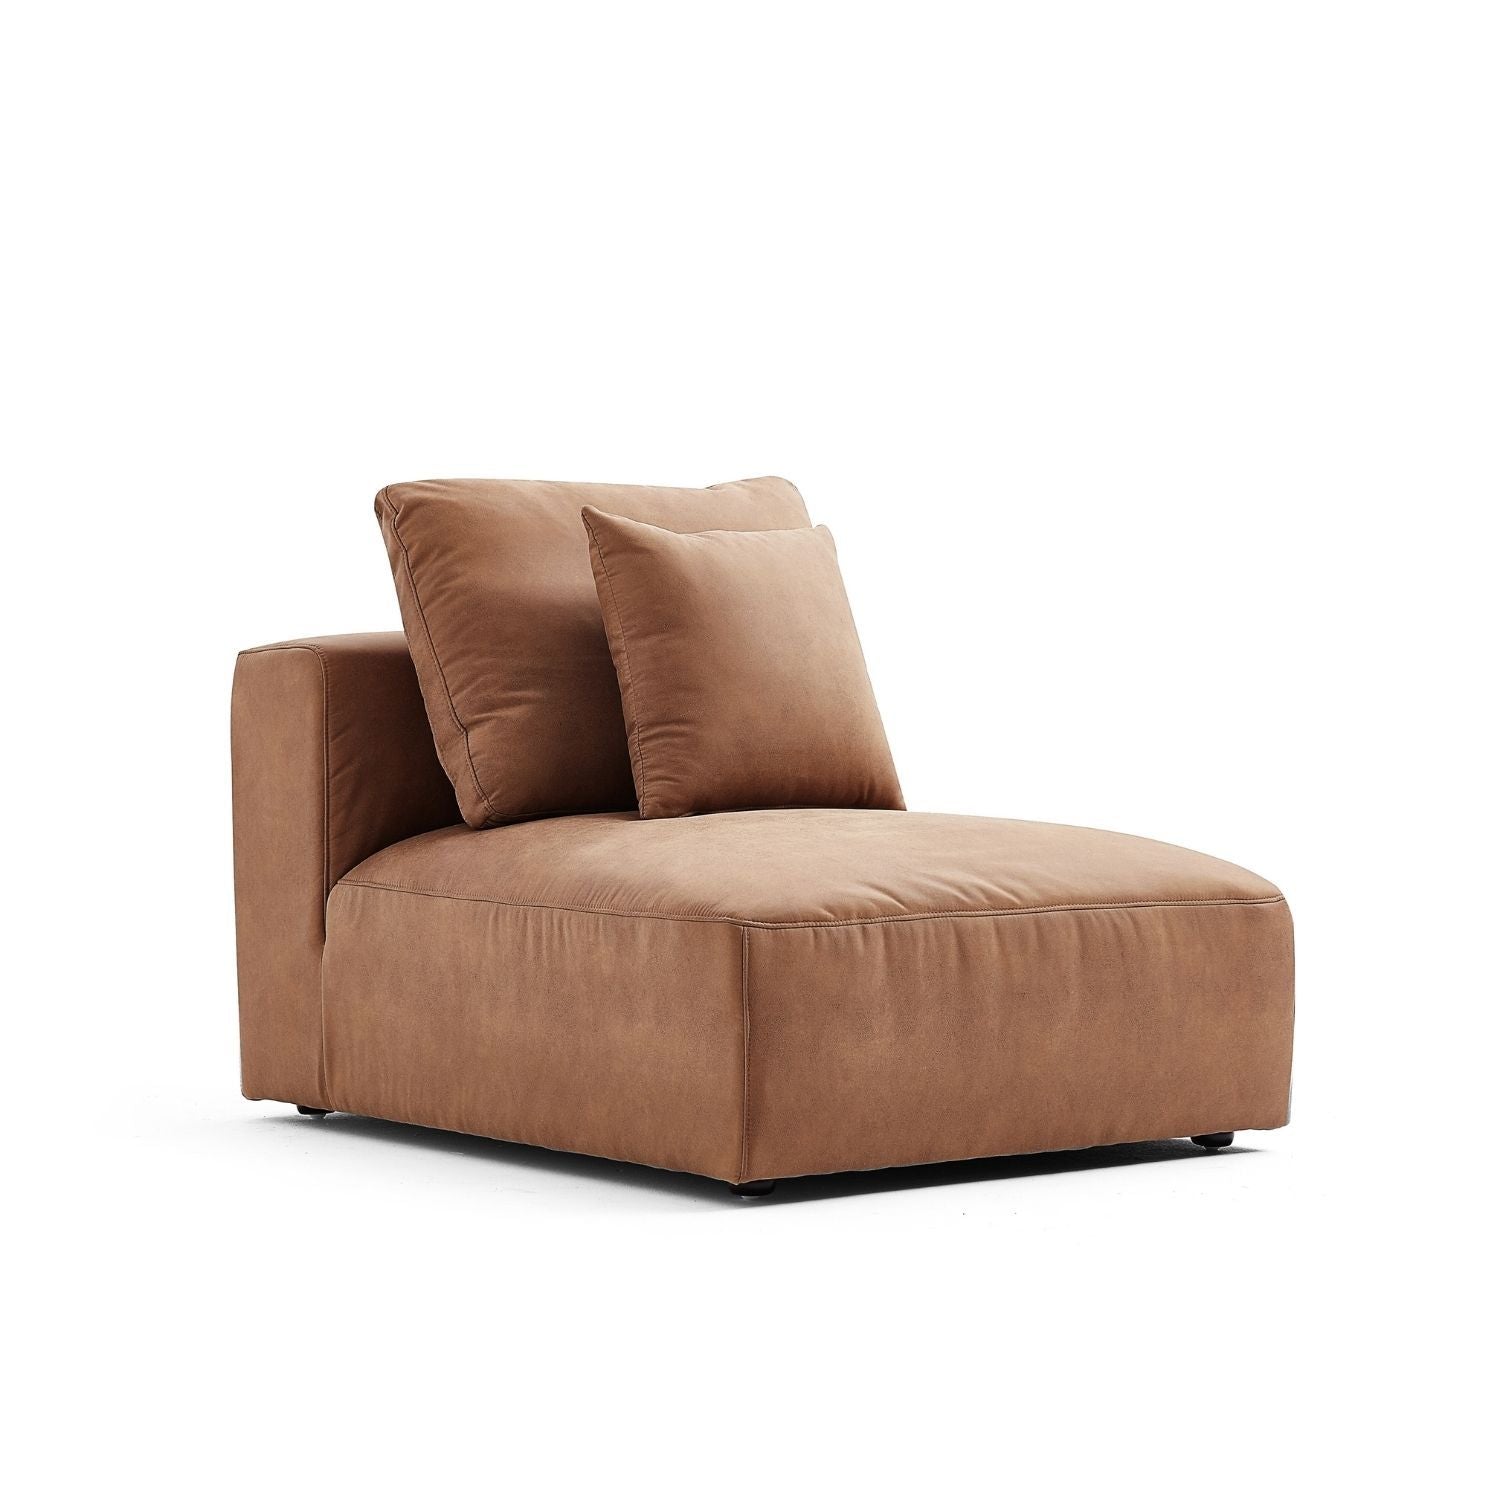 The 5th - Armless Seat Sofa Foundry 